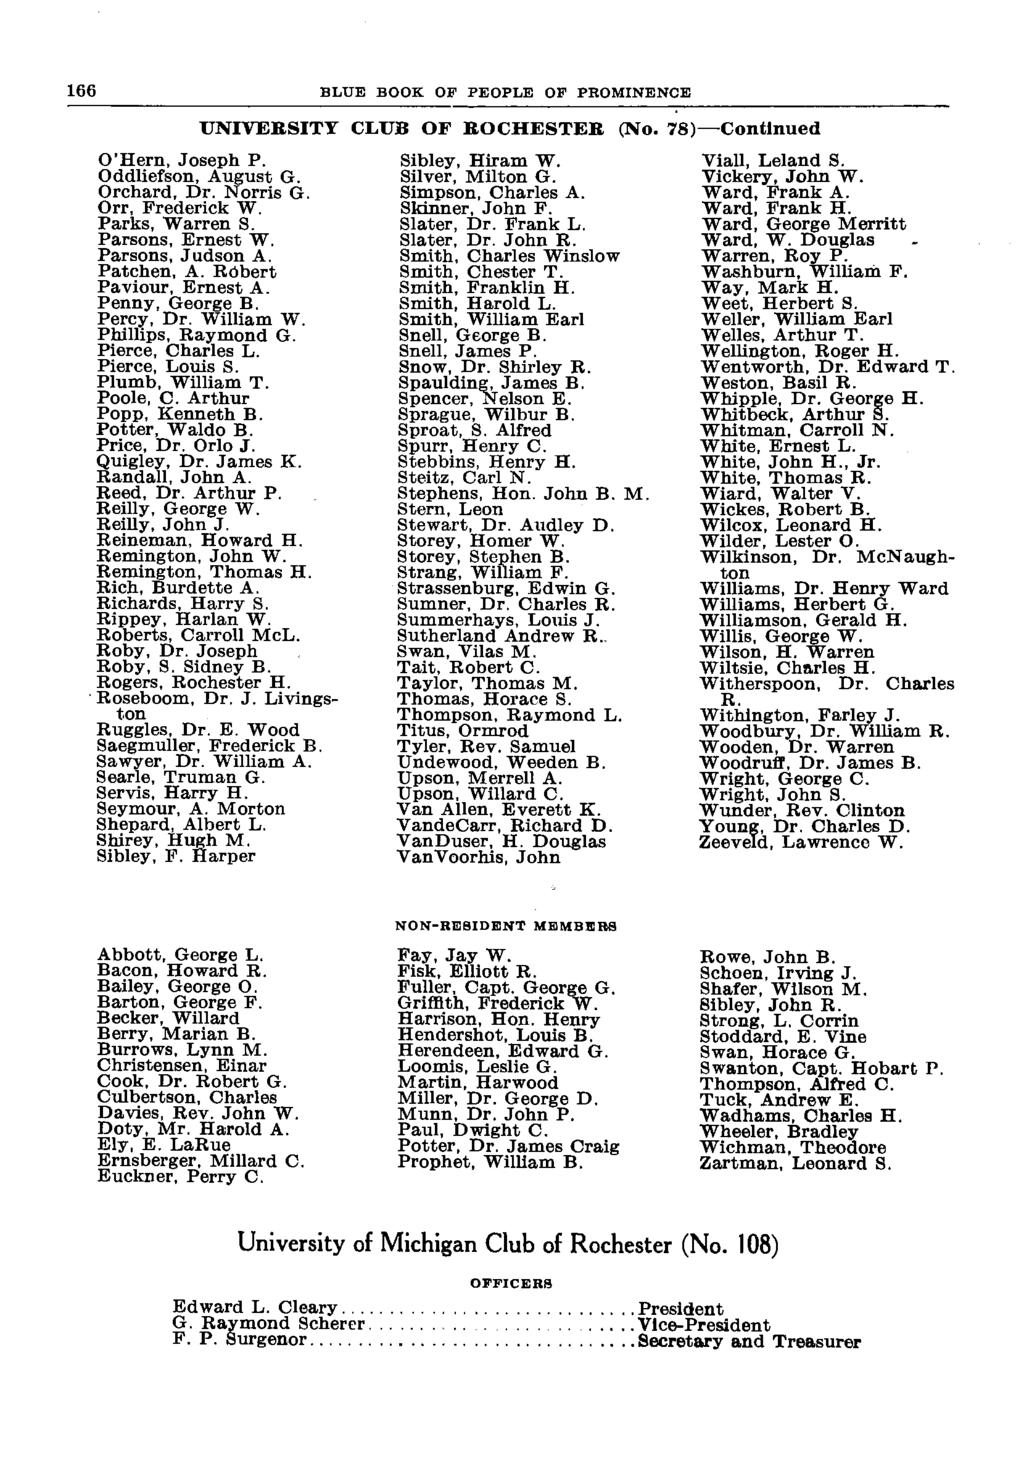 BLUE BOOK OP PEOPLE OF PROMINENCE UNIVERSITY CLUB OF ROCHESTER (No. 78) Continued O'Hern, Joseph P. Oddliefson, August G. Orchard, Dr. Norris G. Orr, Frederick W. Parks, Warren S. Parsons, Ernest W.